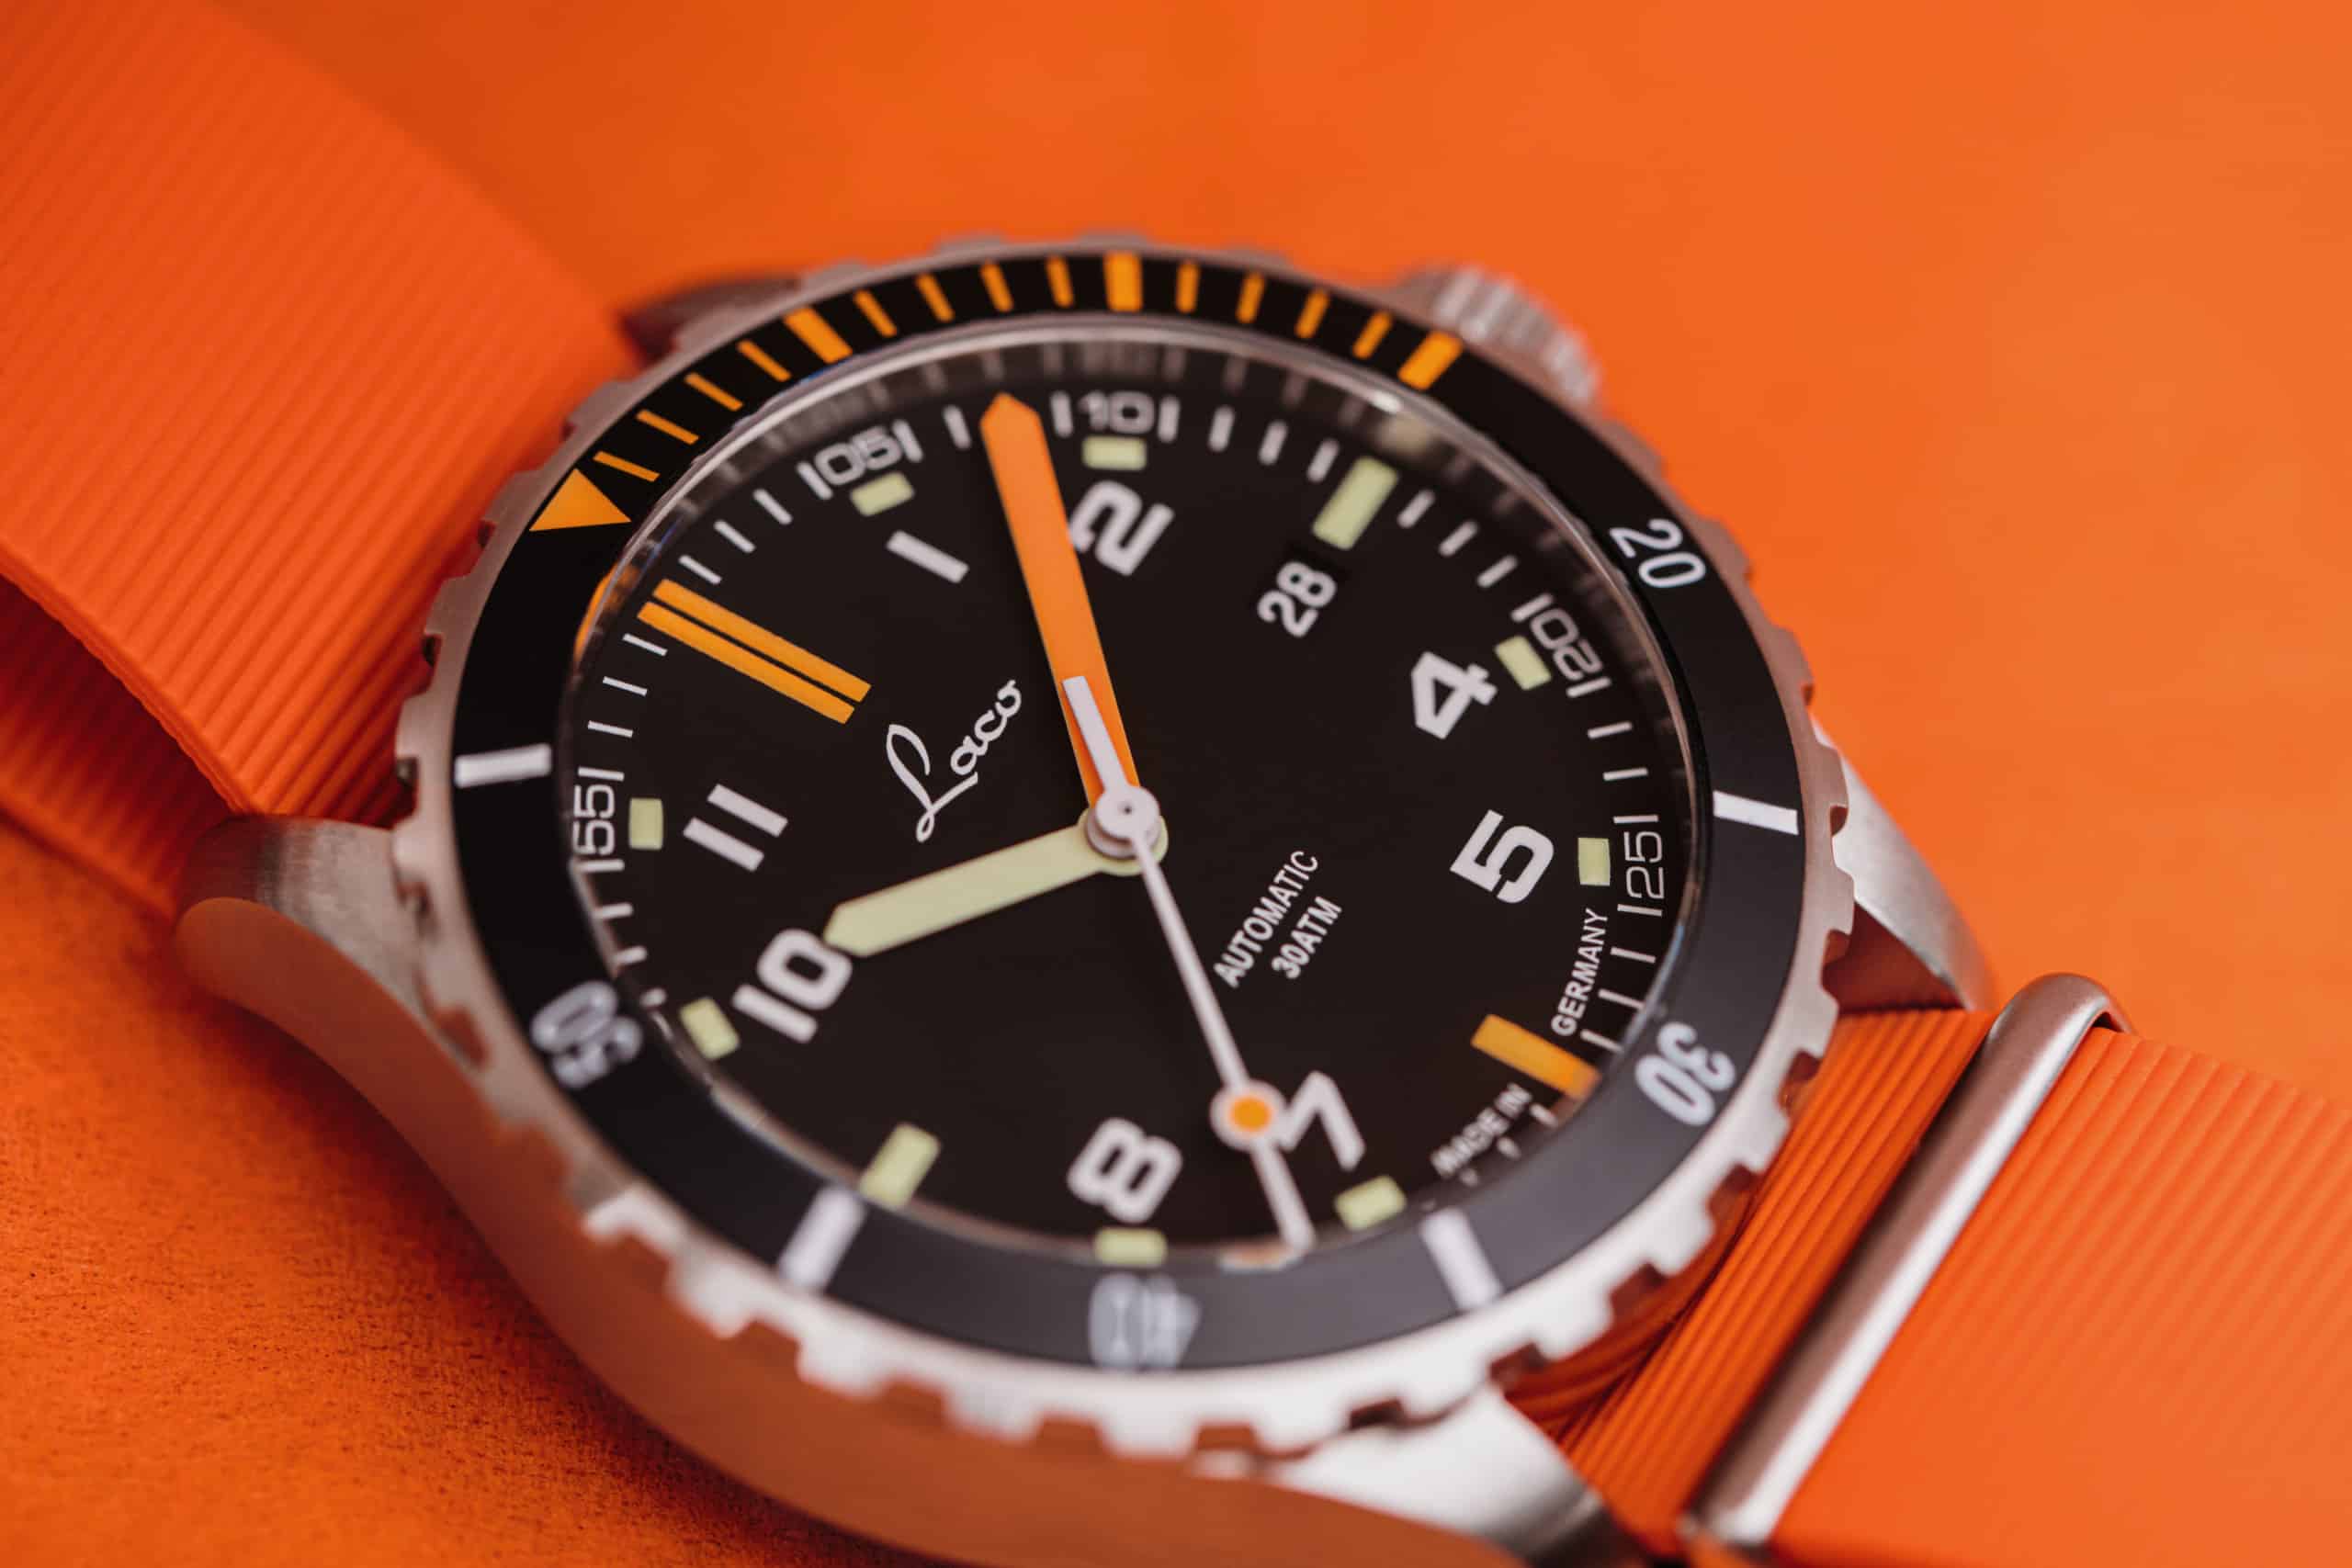 Laco Hits The Sweet Spot With Their New Midsize Scorpion Diver